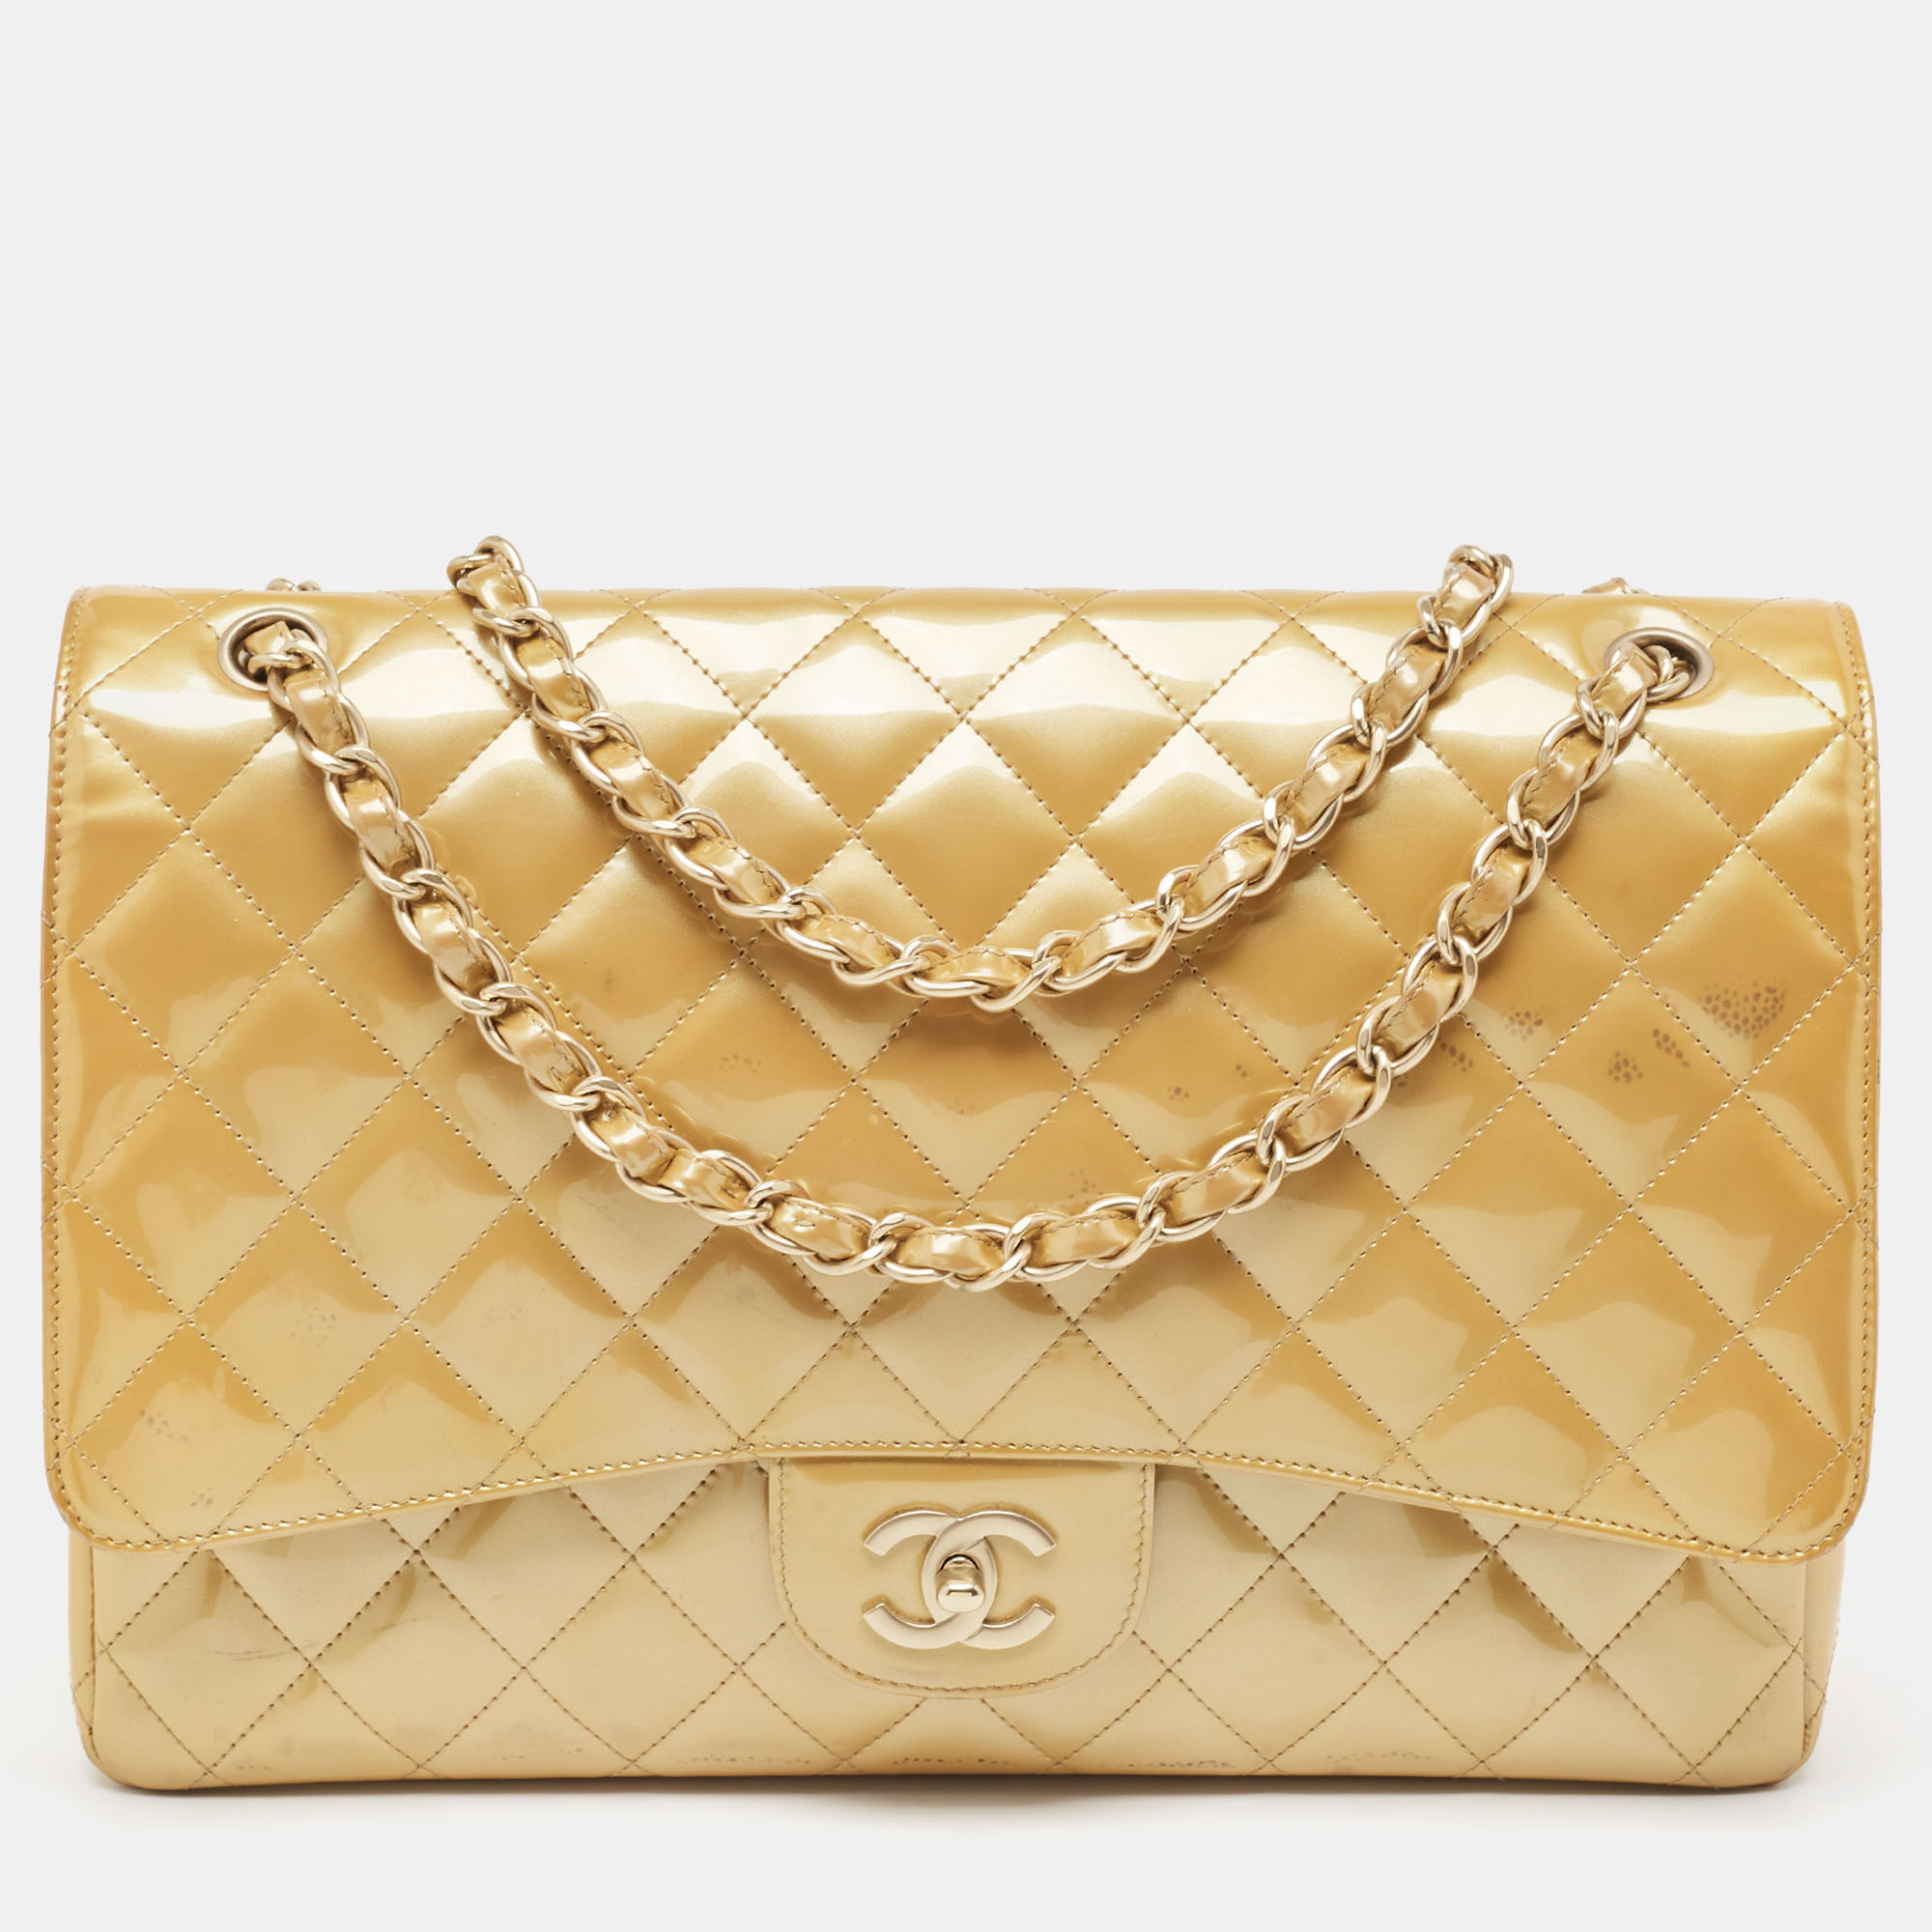 Chanel cream quilted patent leather maxi classic single flap bag